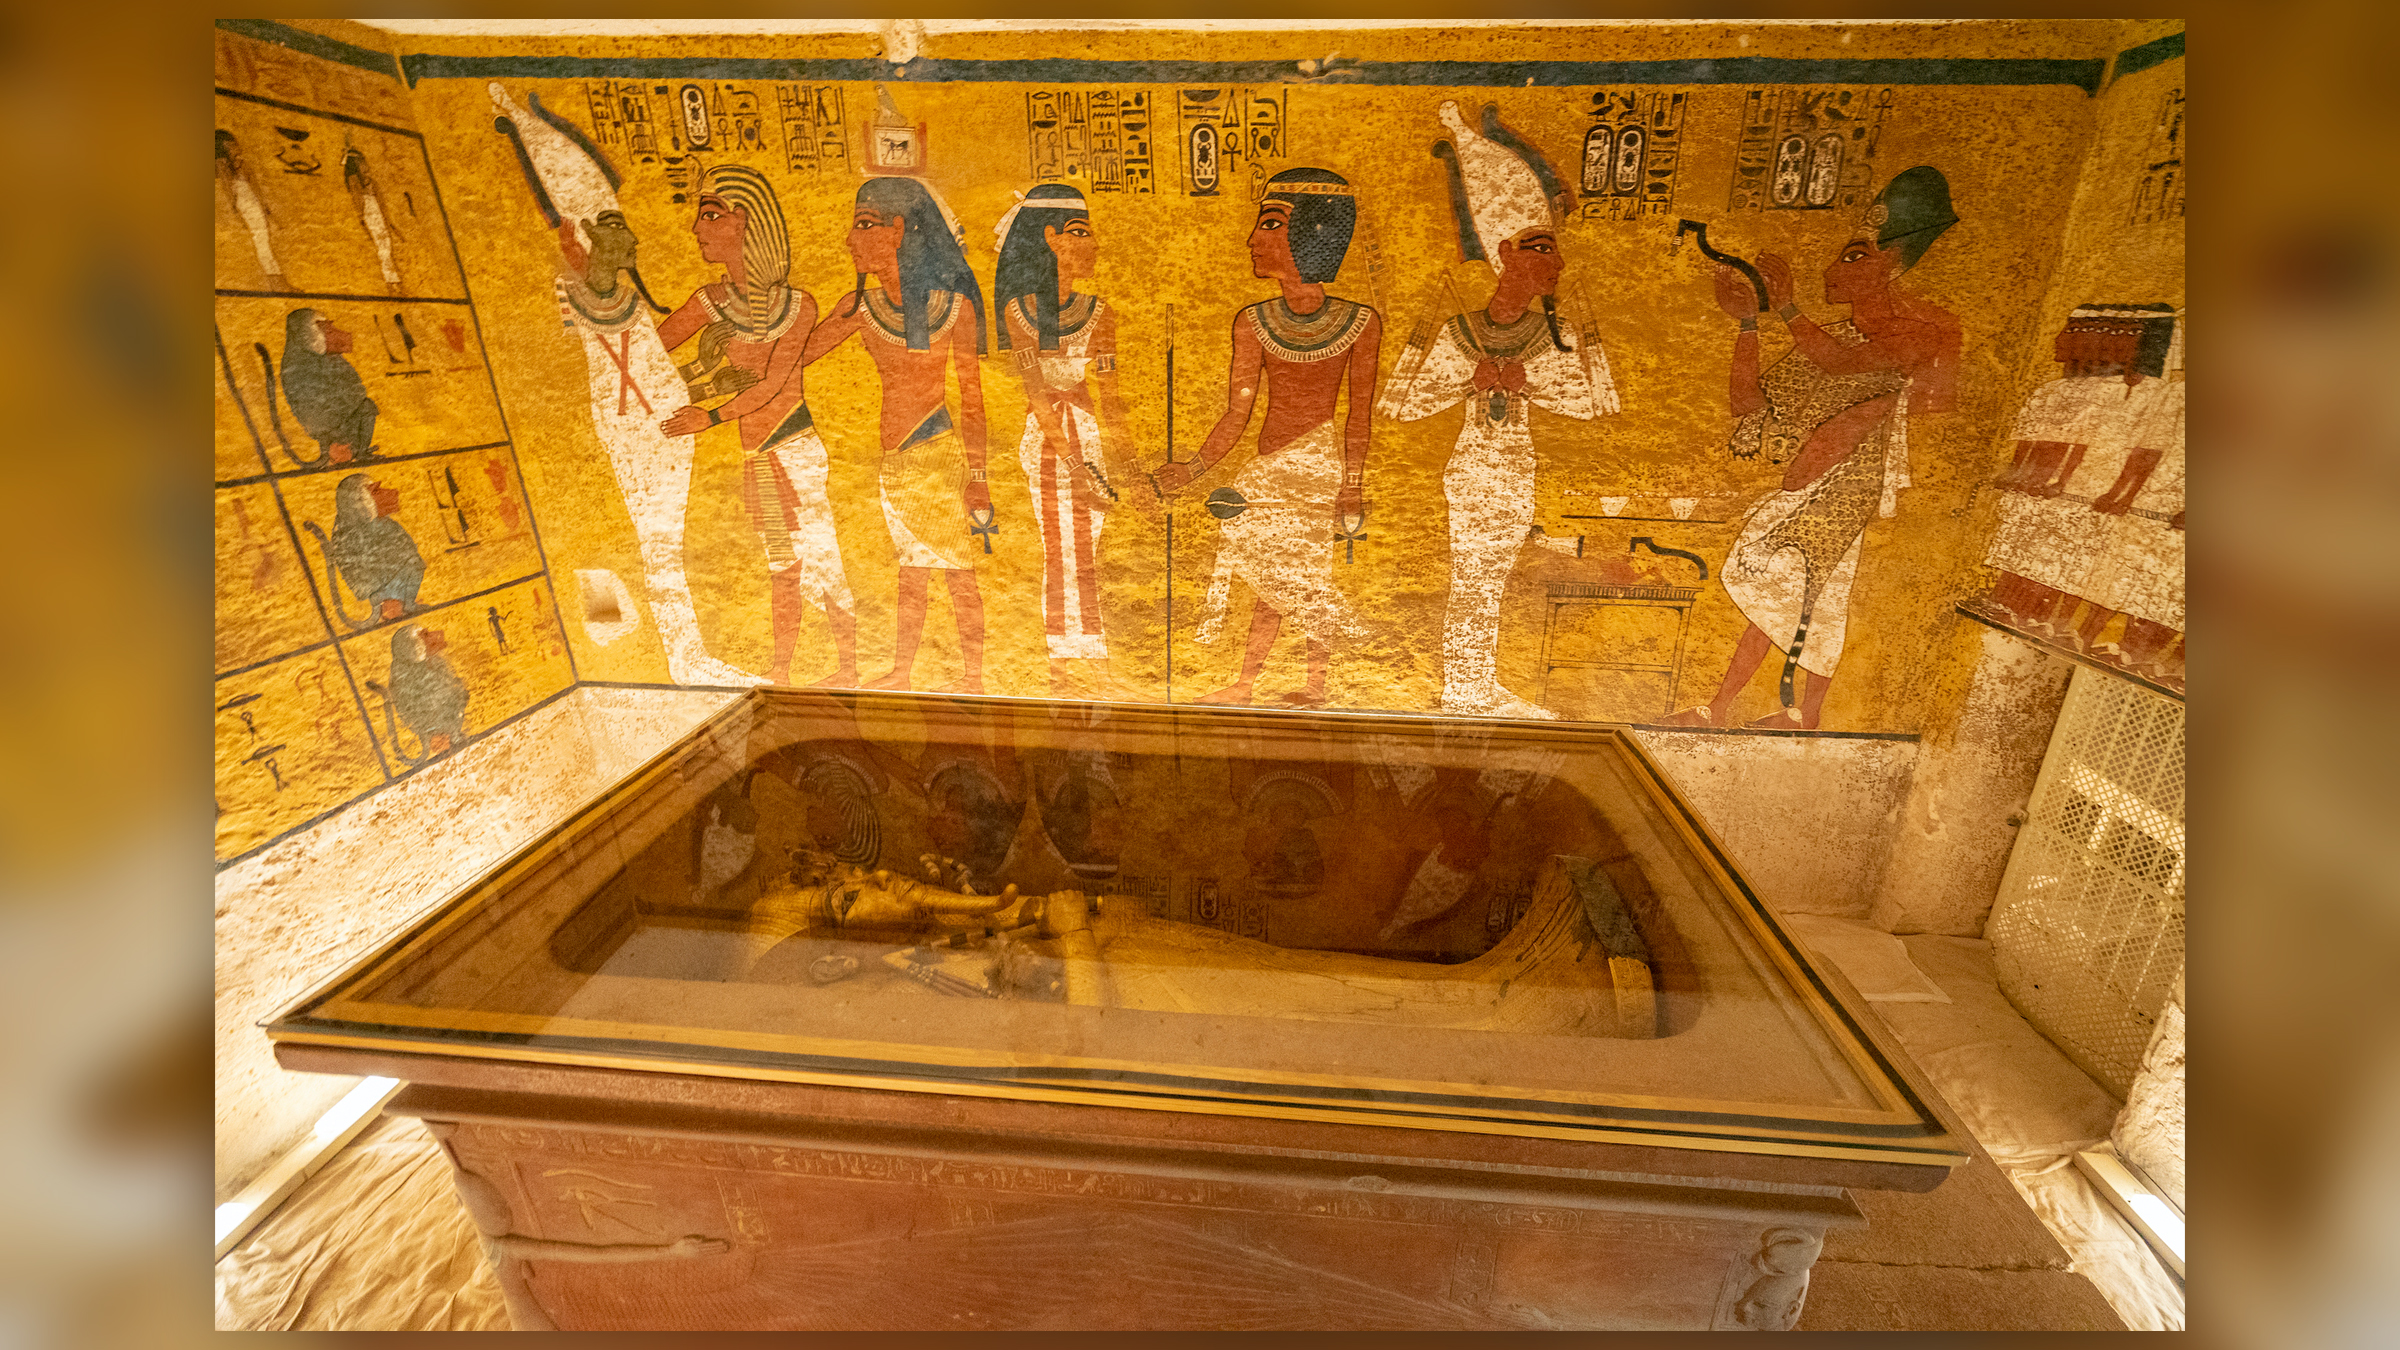 A photo of the tomb of Pharaoh Tutankhamun in the Valley of the Kings at Luxor. The coffin is in the center of the room, with Egyptian paintings on the walls.